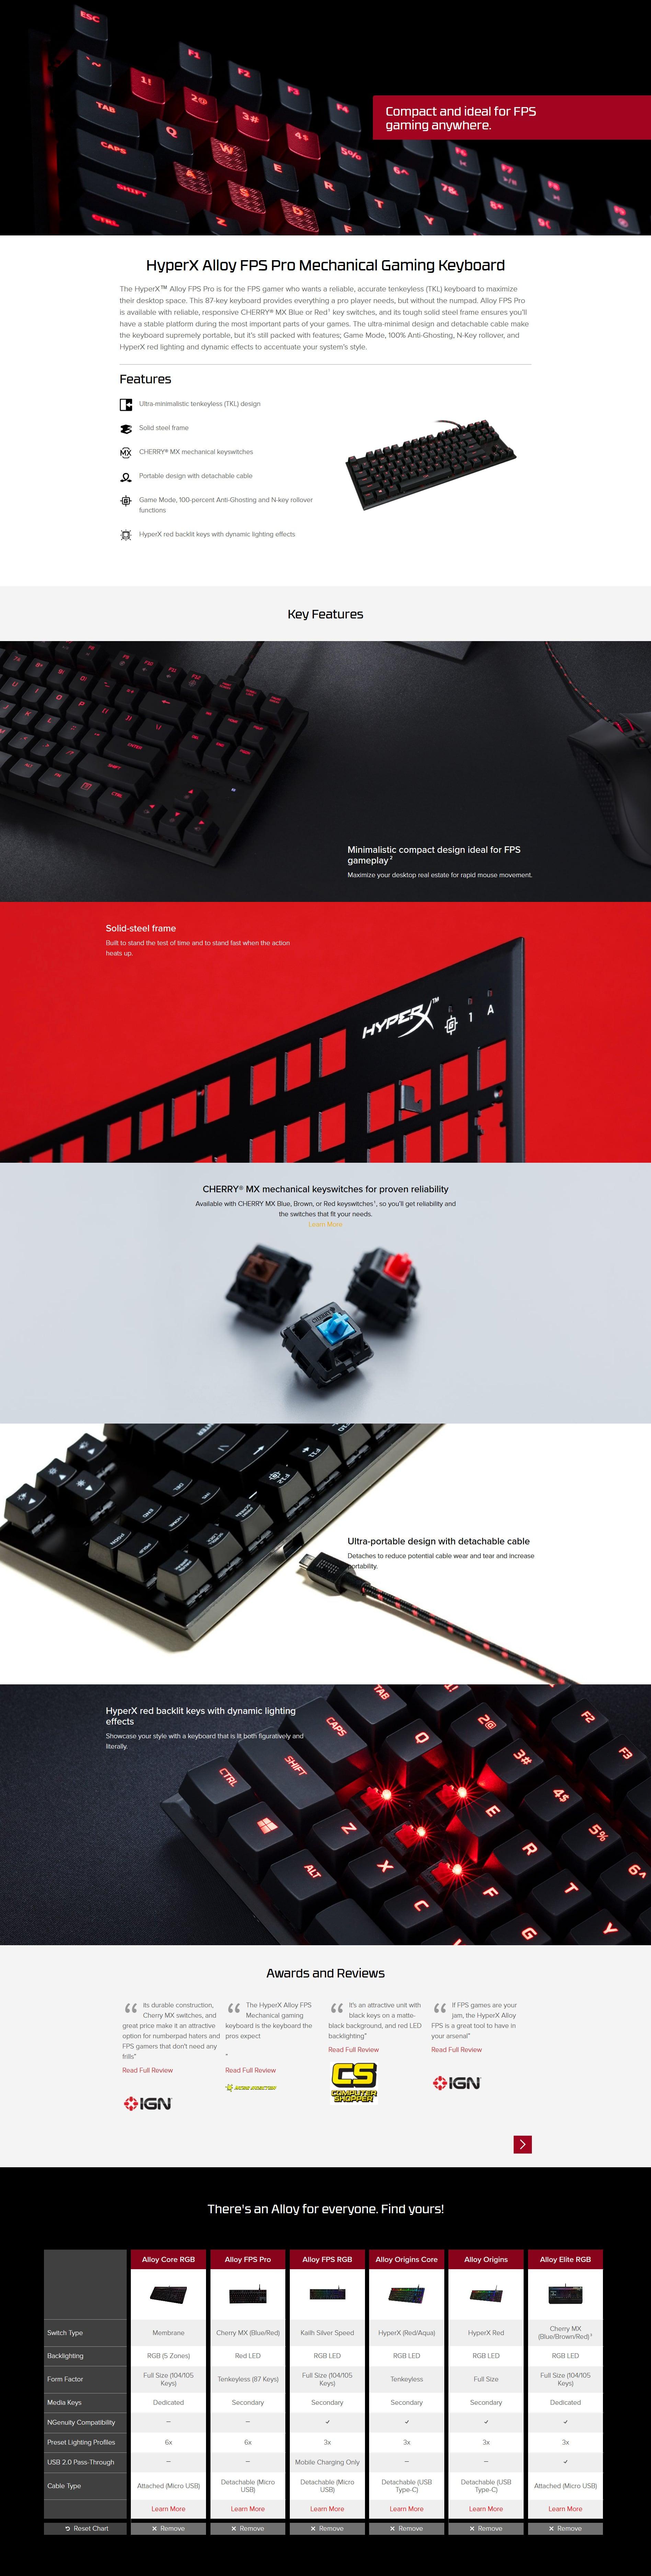 HyperX Alloy FPS Pro Mechanical Keyboard with Cherry MX Red Key Switches